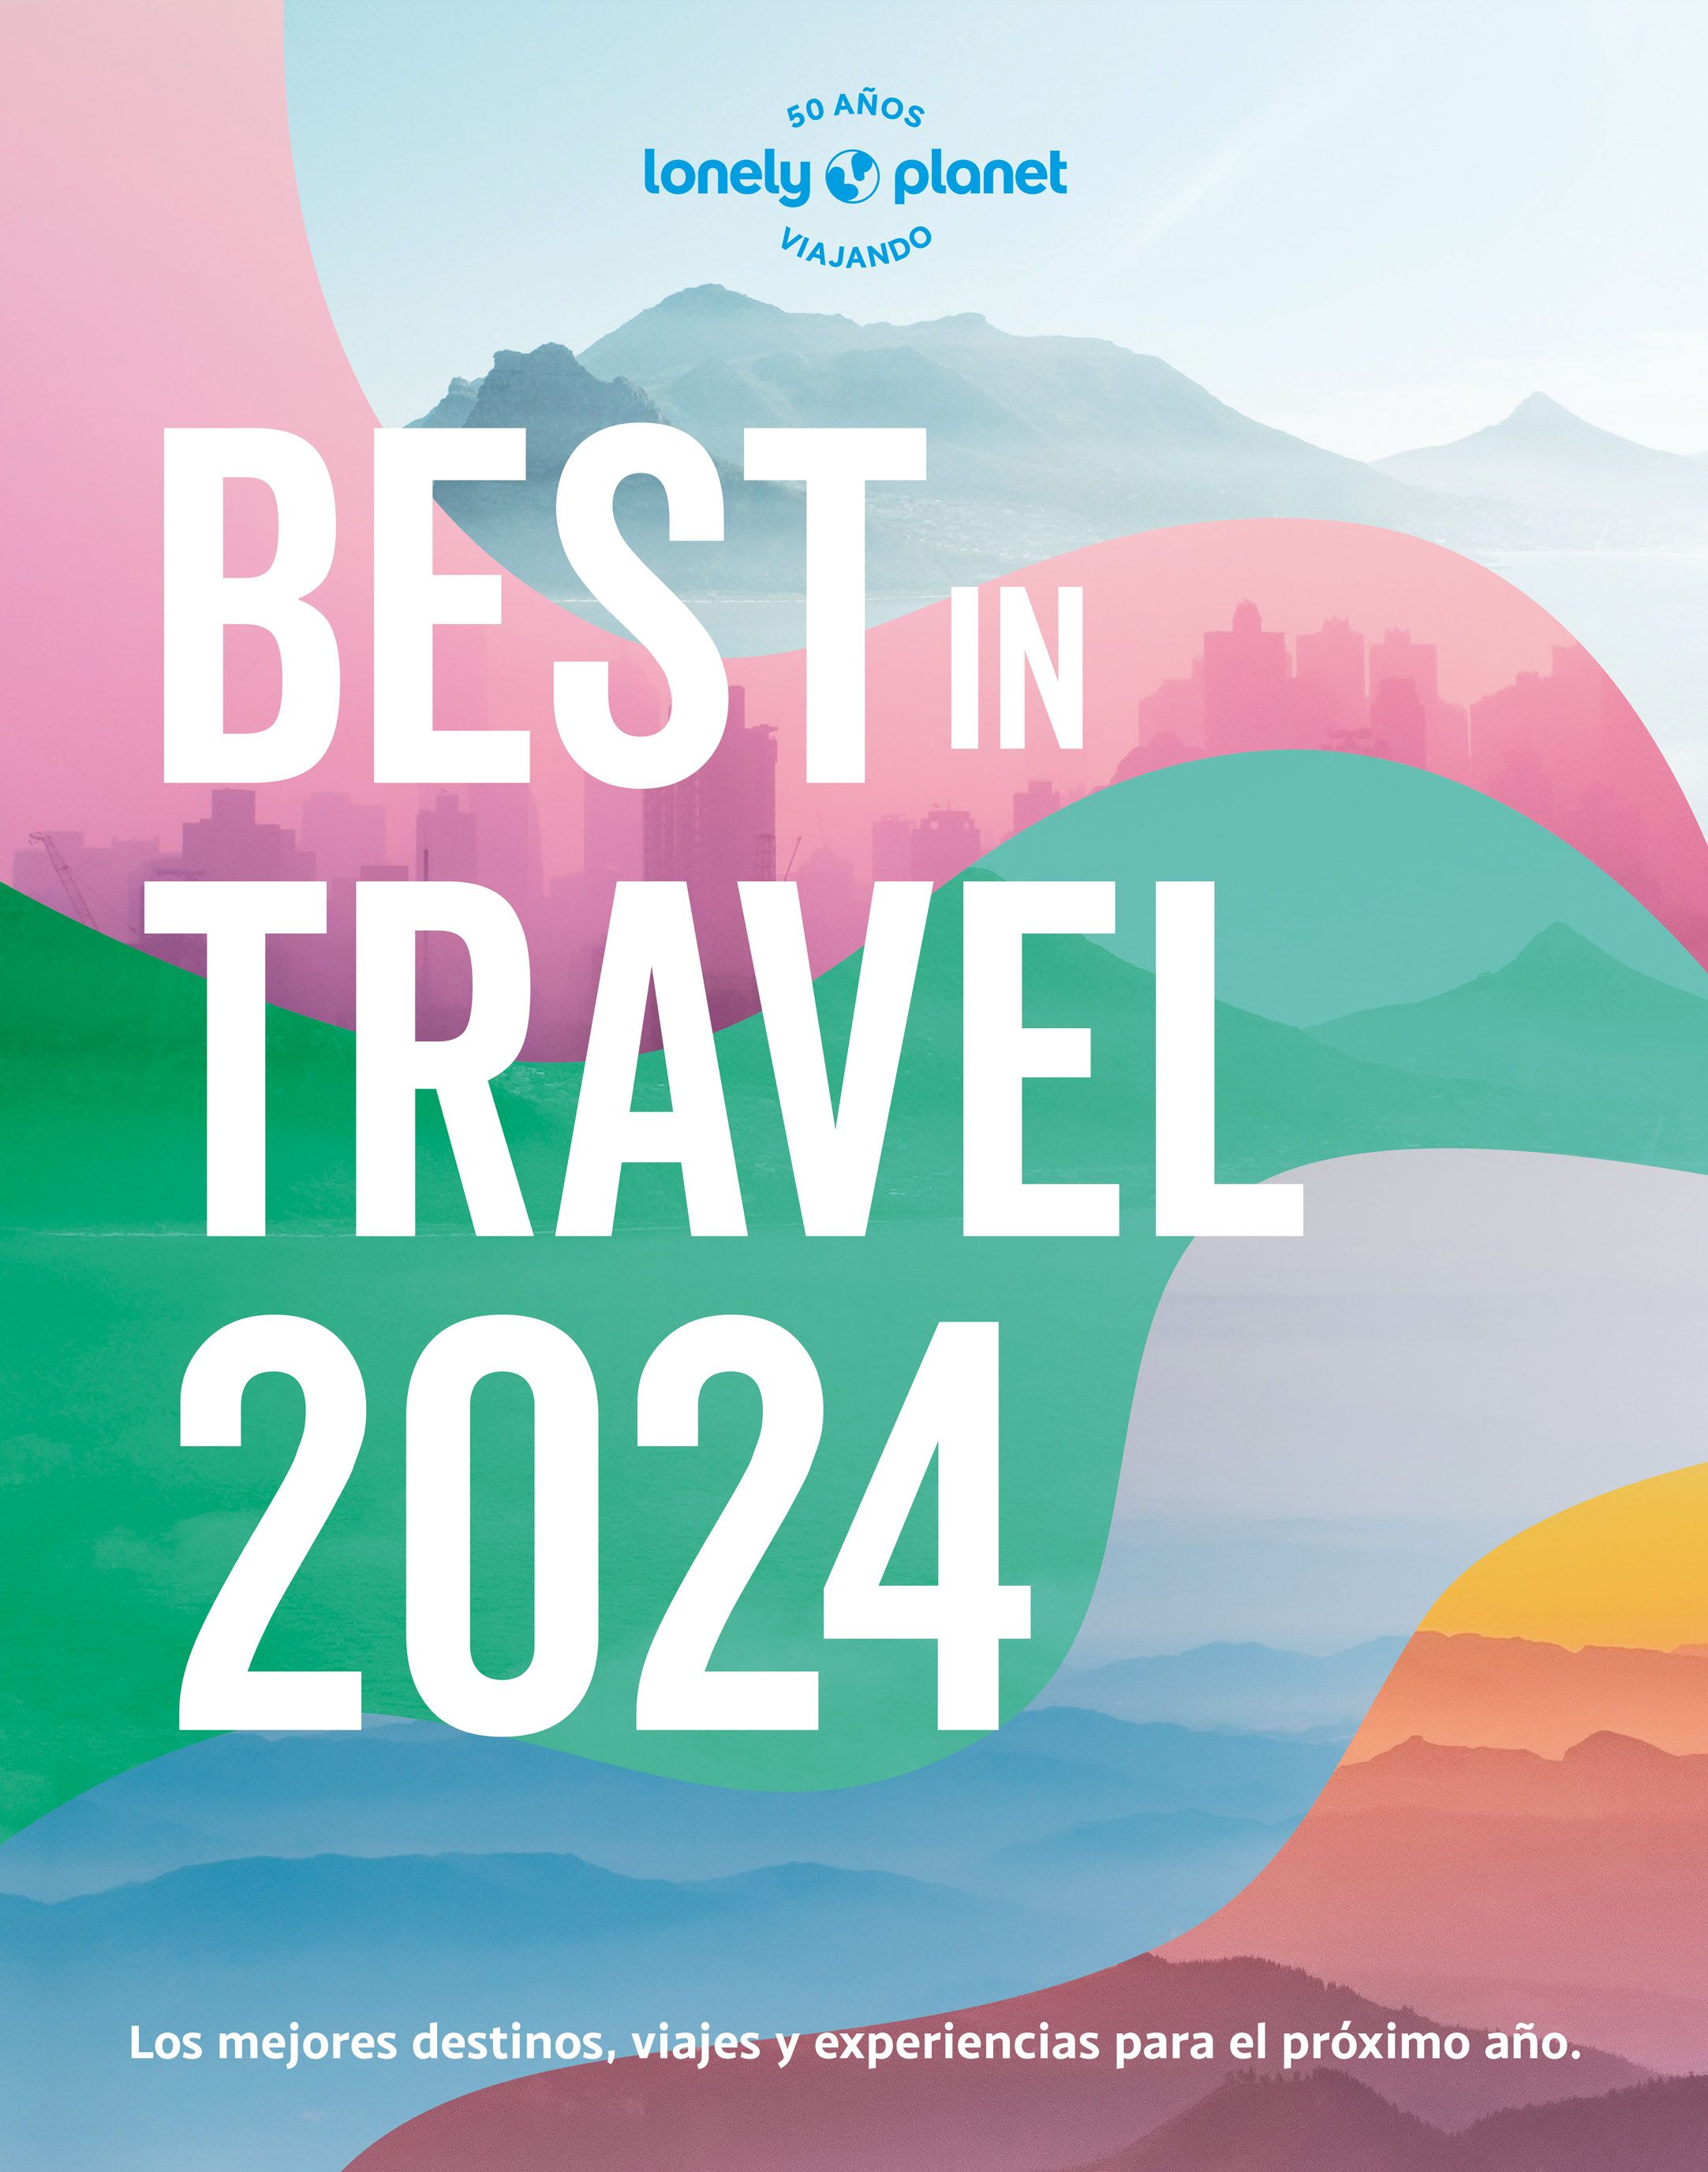 Best in travel 2024 Lonely